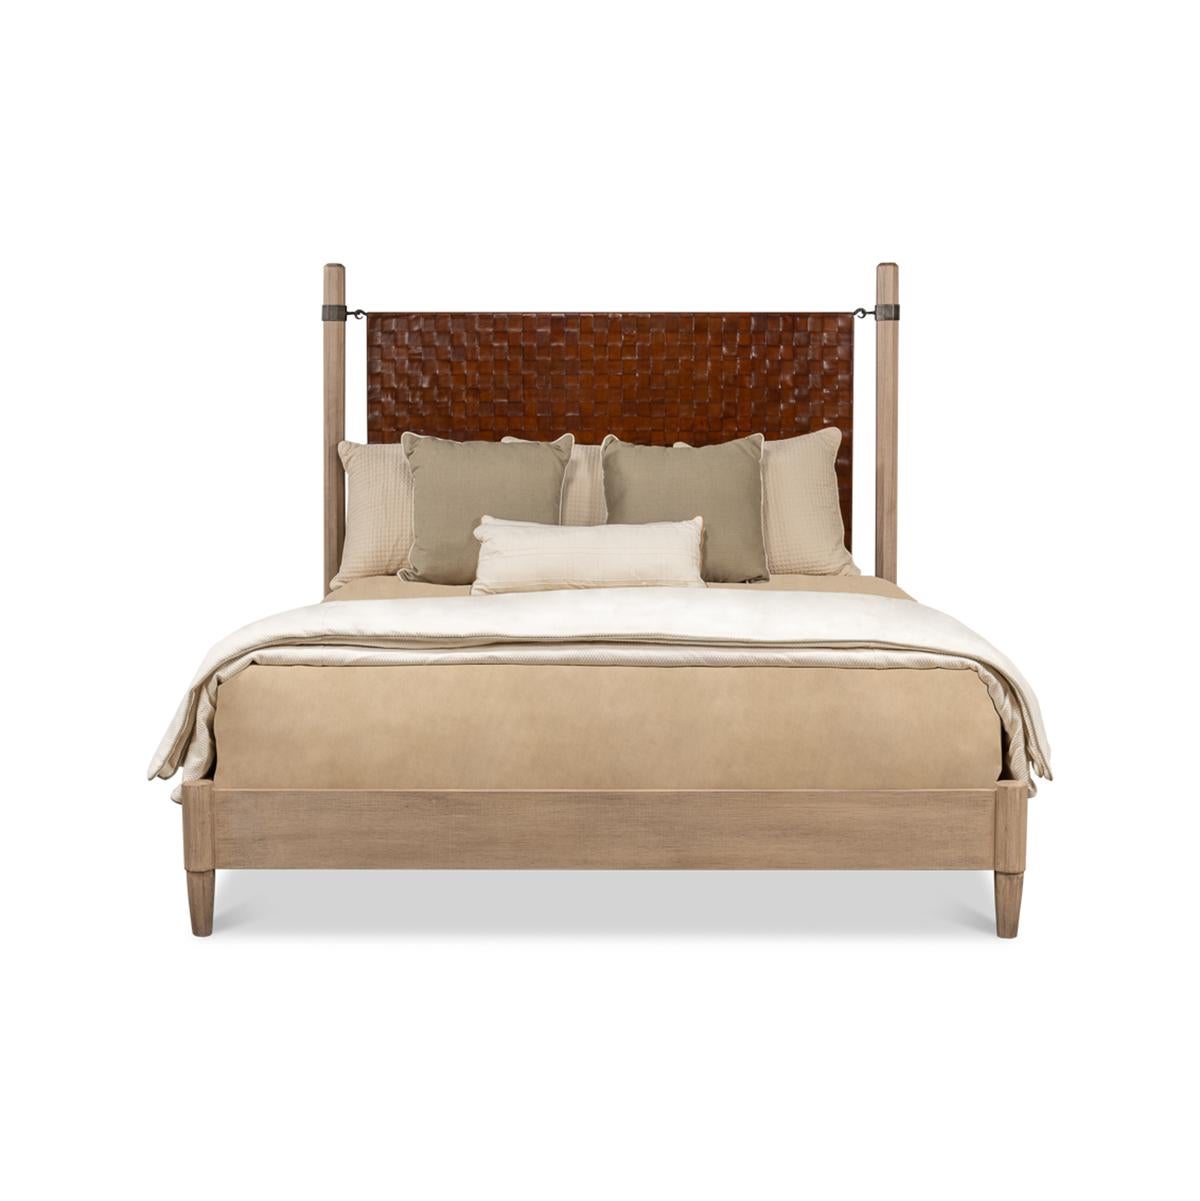 King Size Modern Industrial Bed with hand-woven brown leather headboard with hand forged iron hardware, a natural finish pine veneered frame with octagonal turrets and tapered legs.

Dimensions: 83